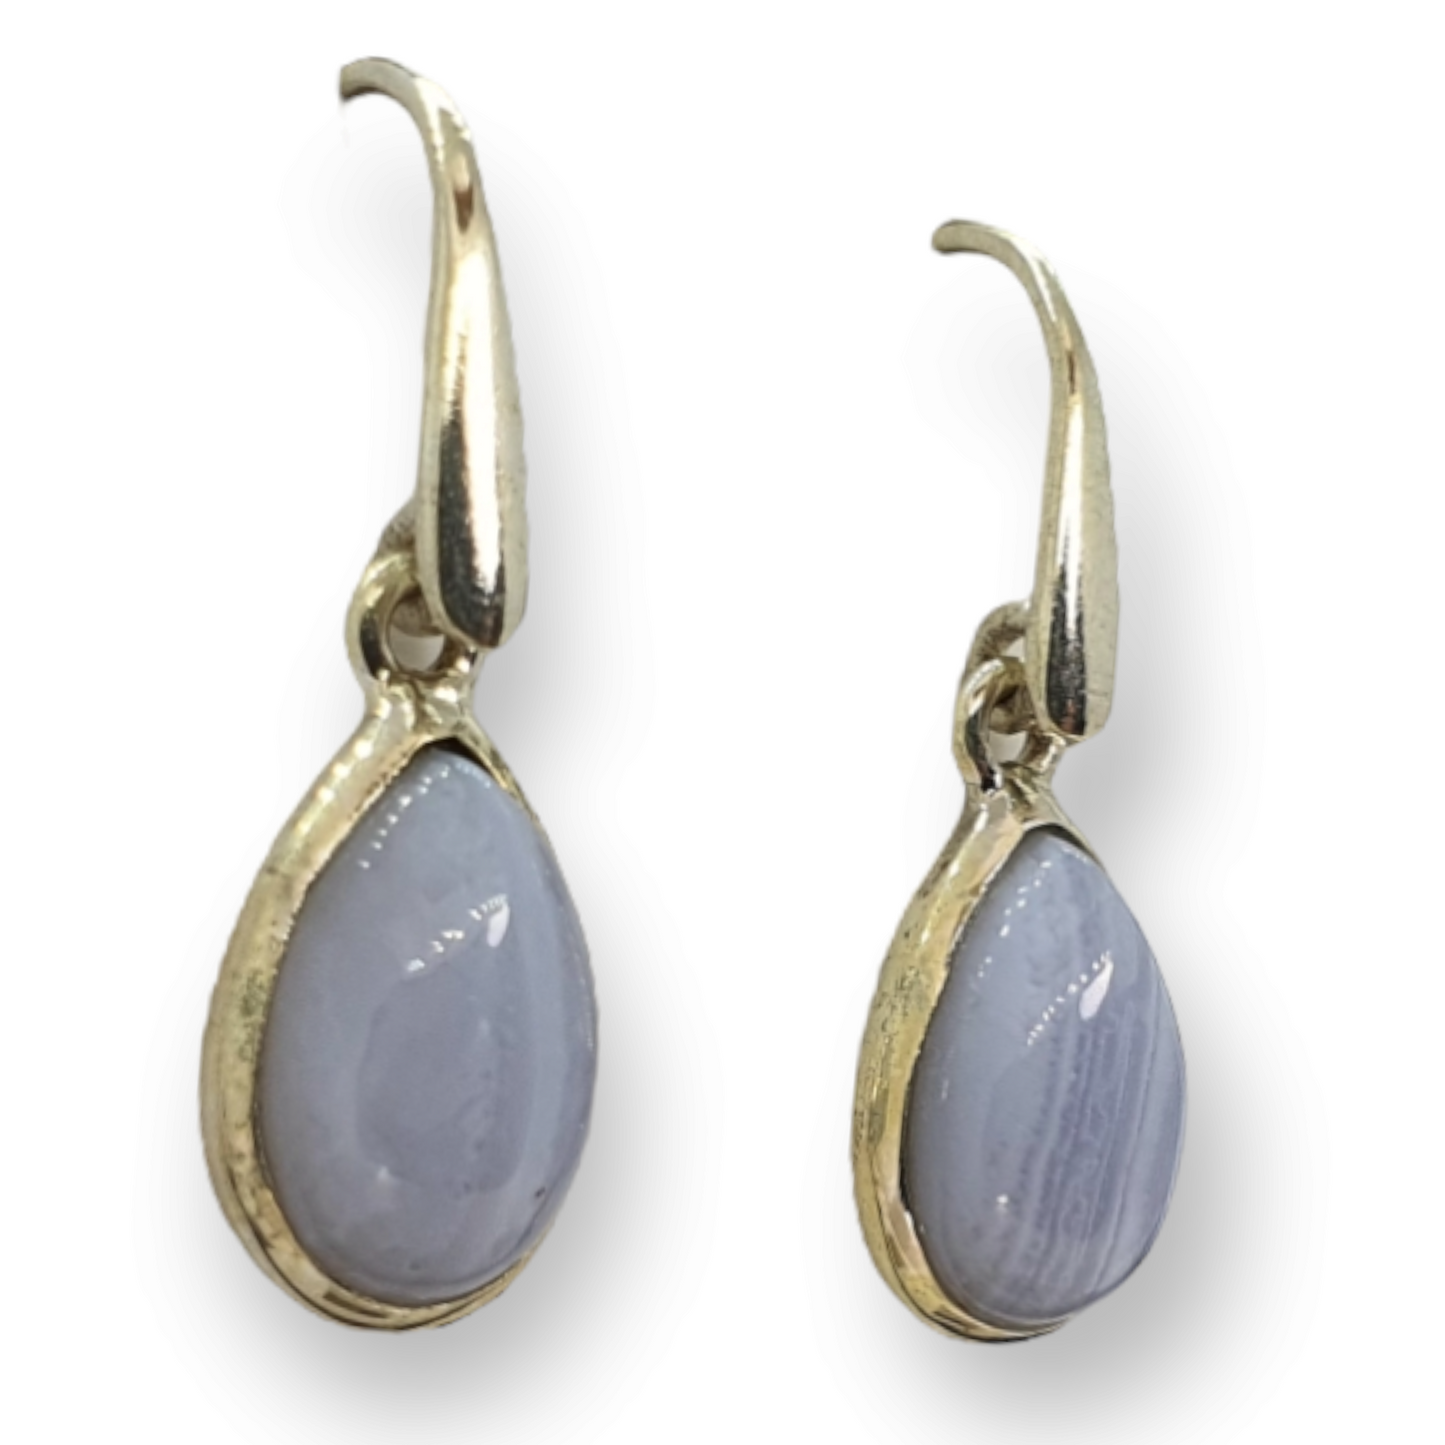 Crystals - Agate (Blue Lace) Drop/Hook Earrings - Sterling Silver